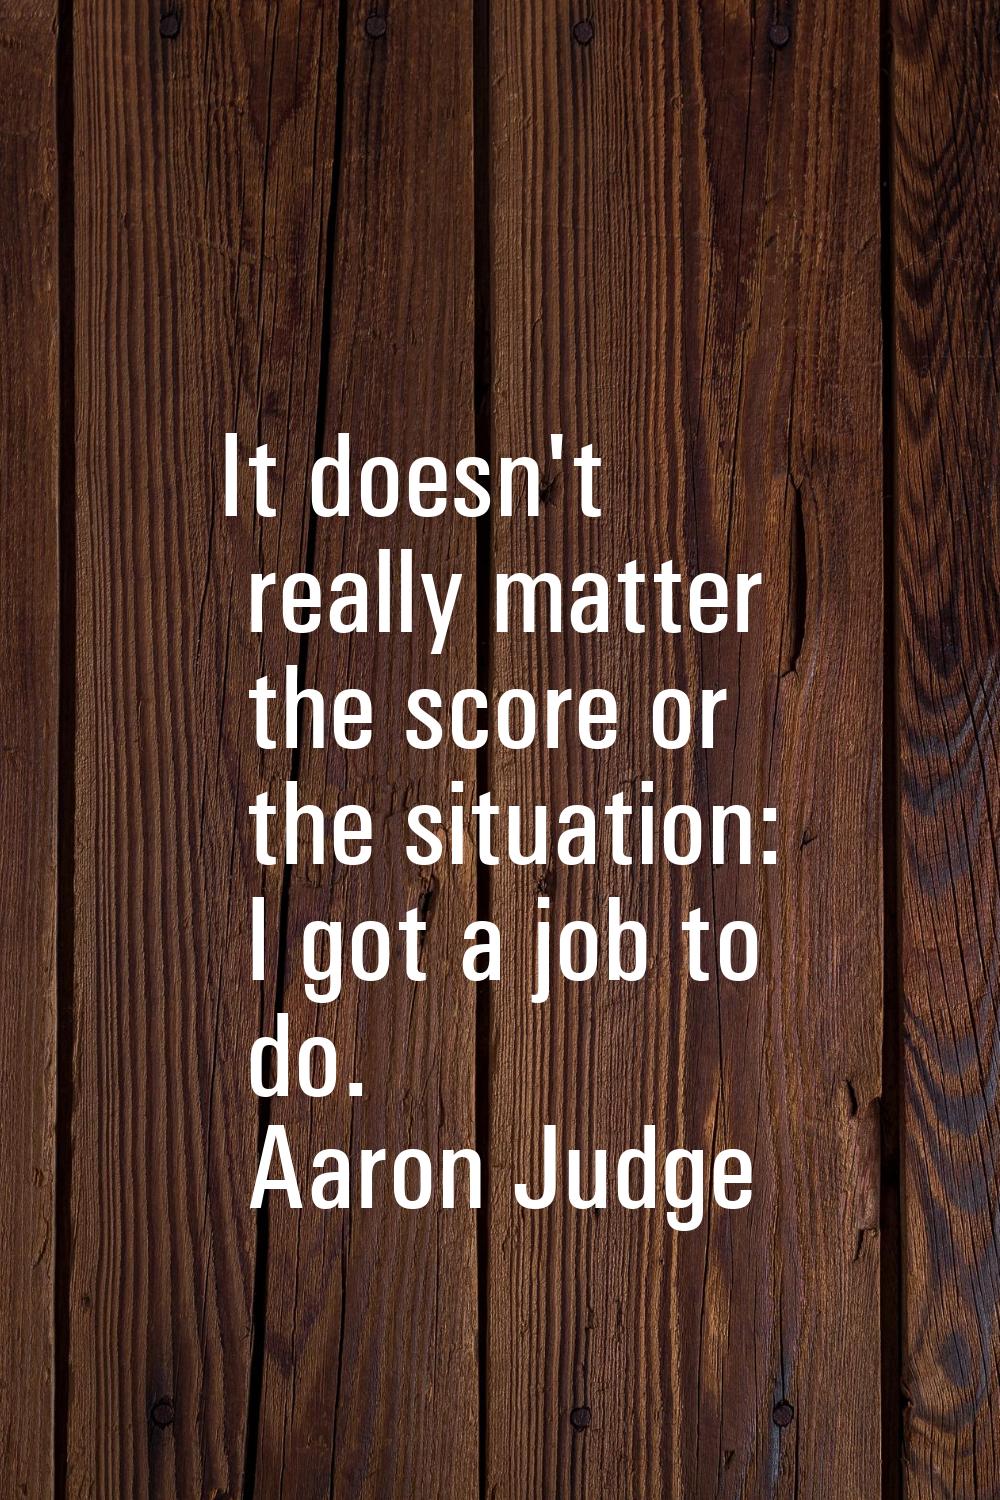 It doesn't really matter the score or the situation: I got a job to do.